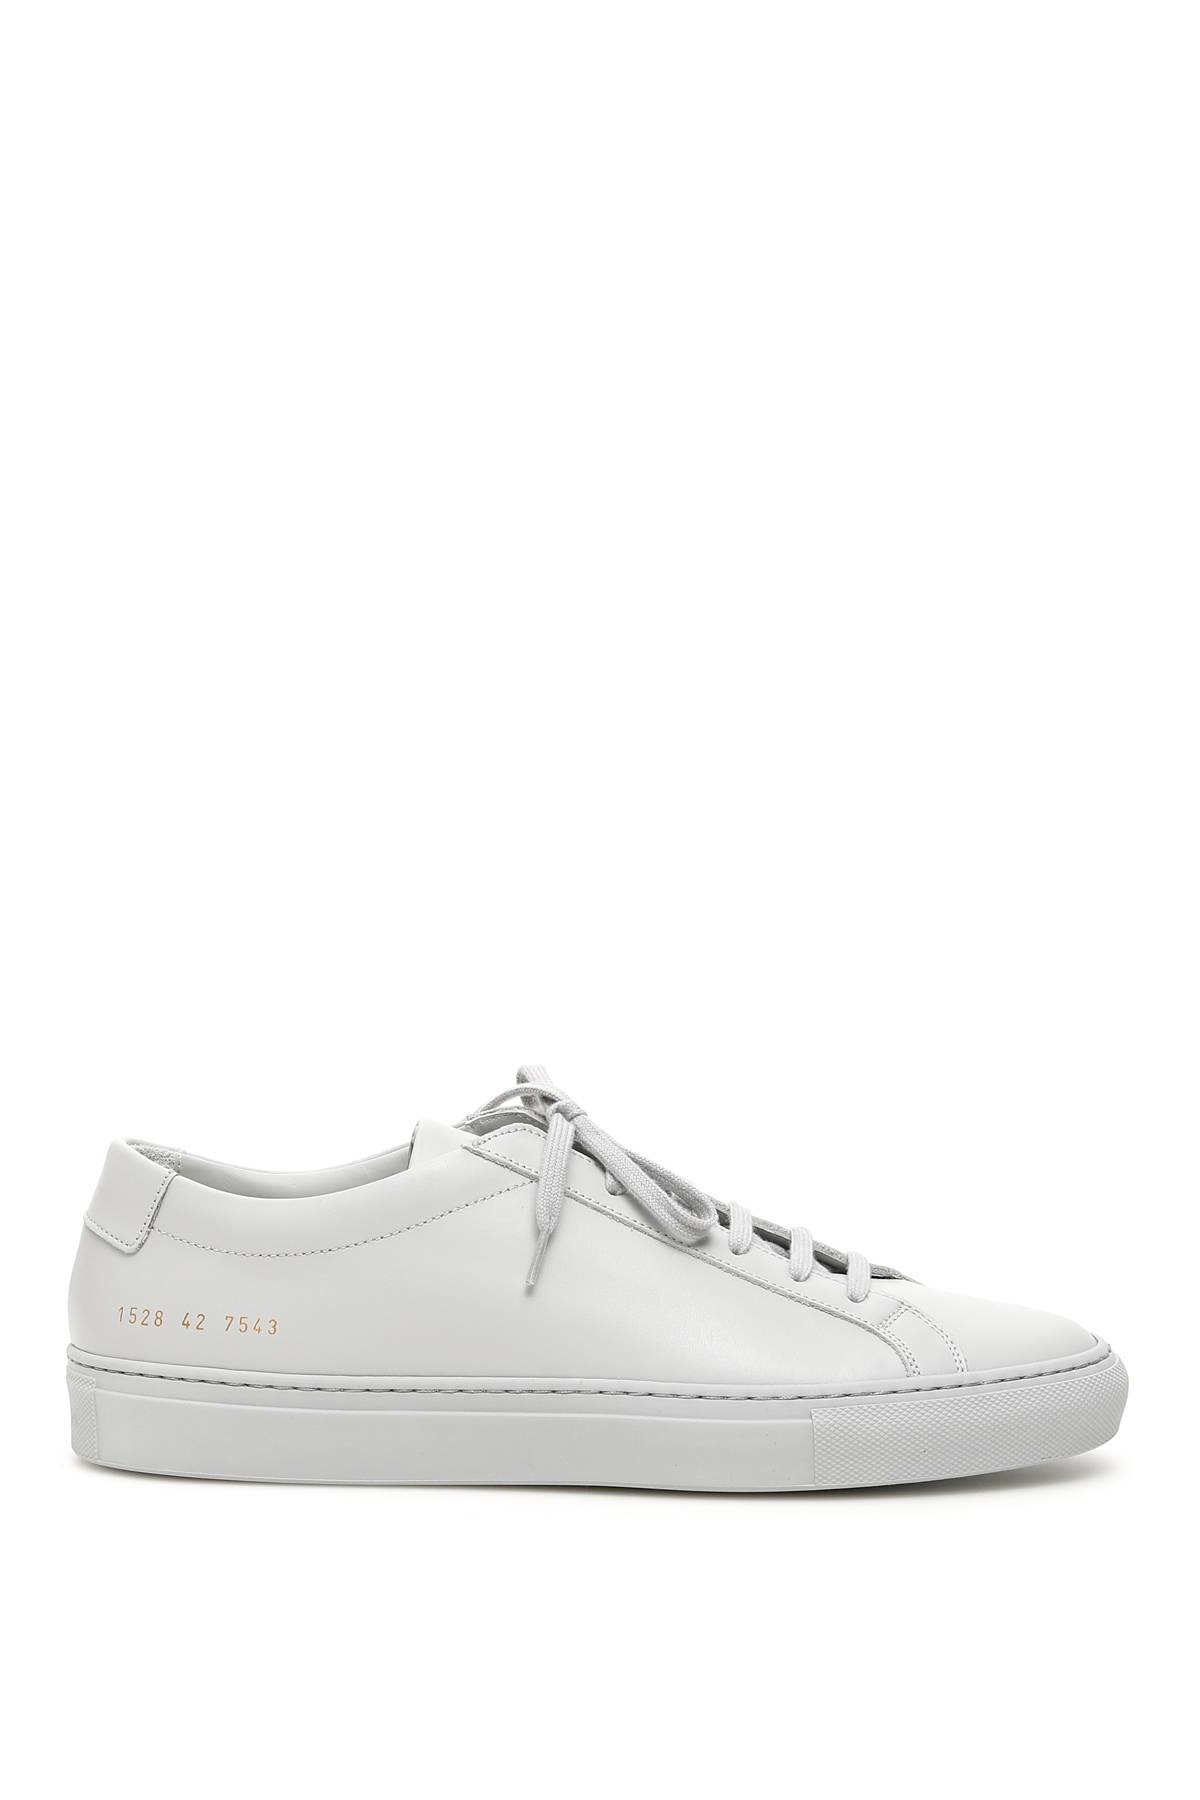 COMMON PROJECTS COMMON PROJECTS original achilles low sneakers